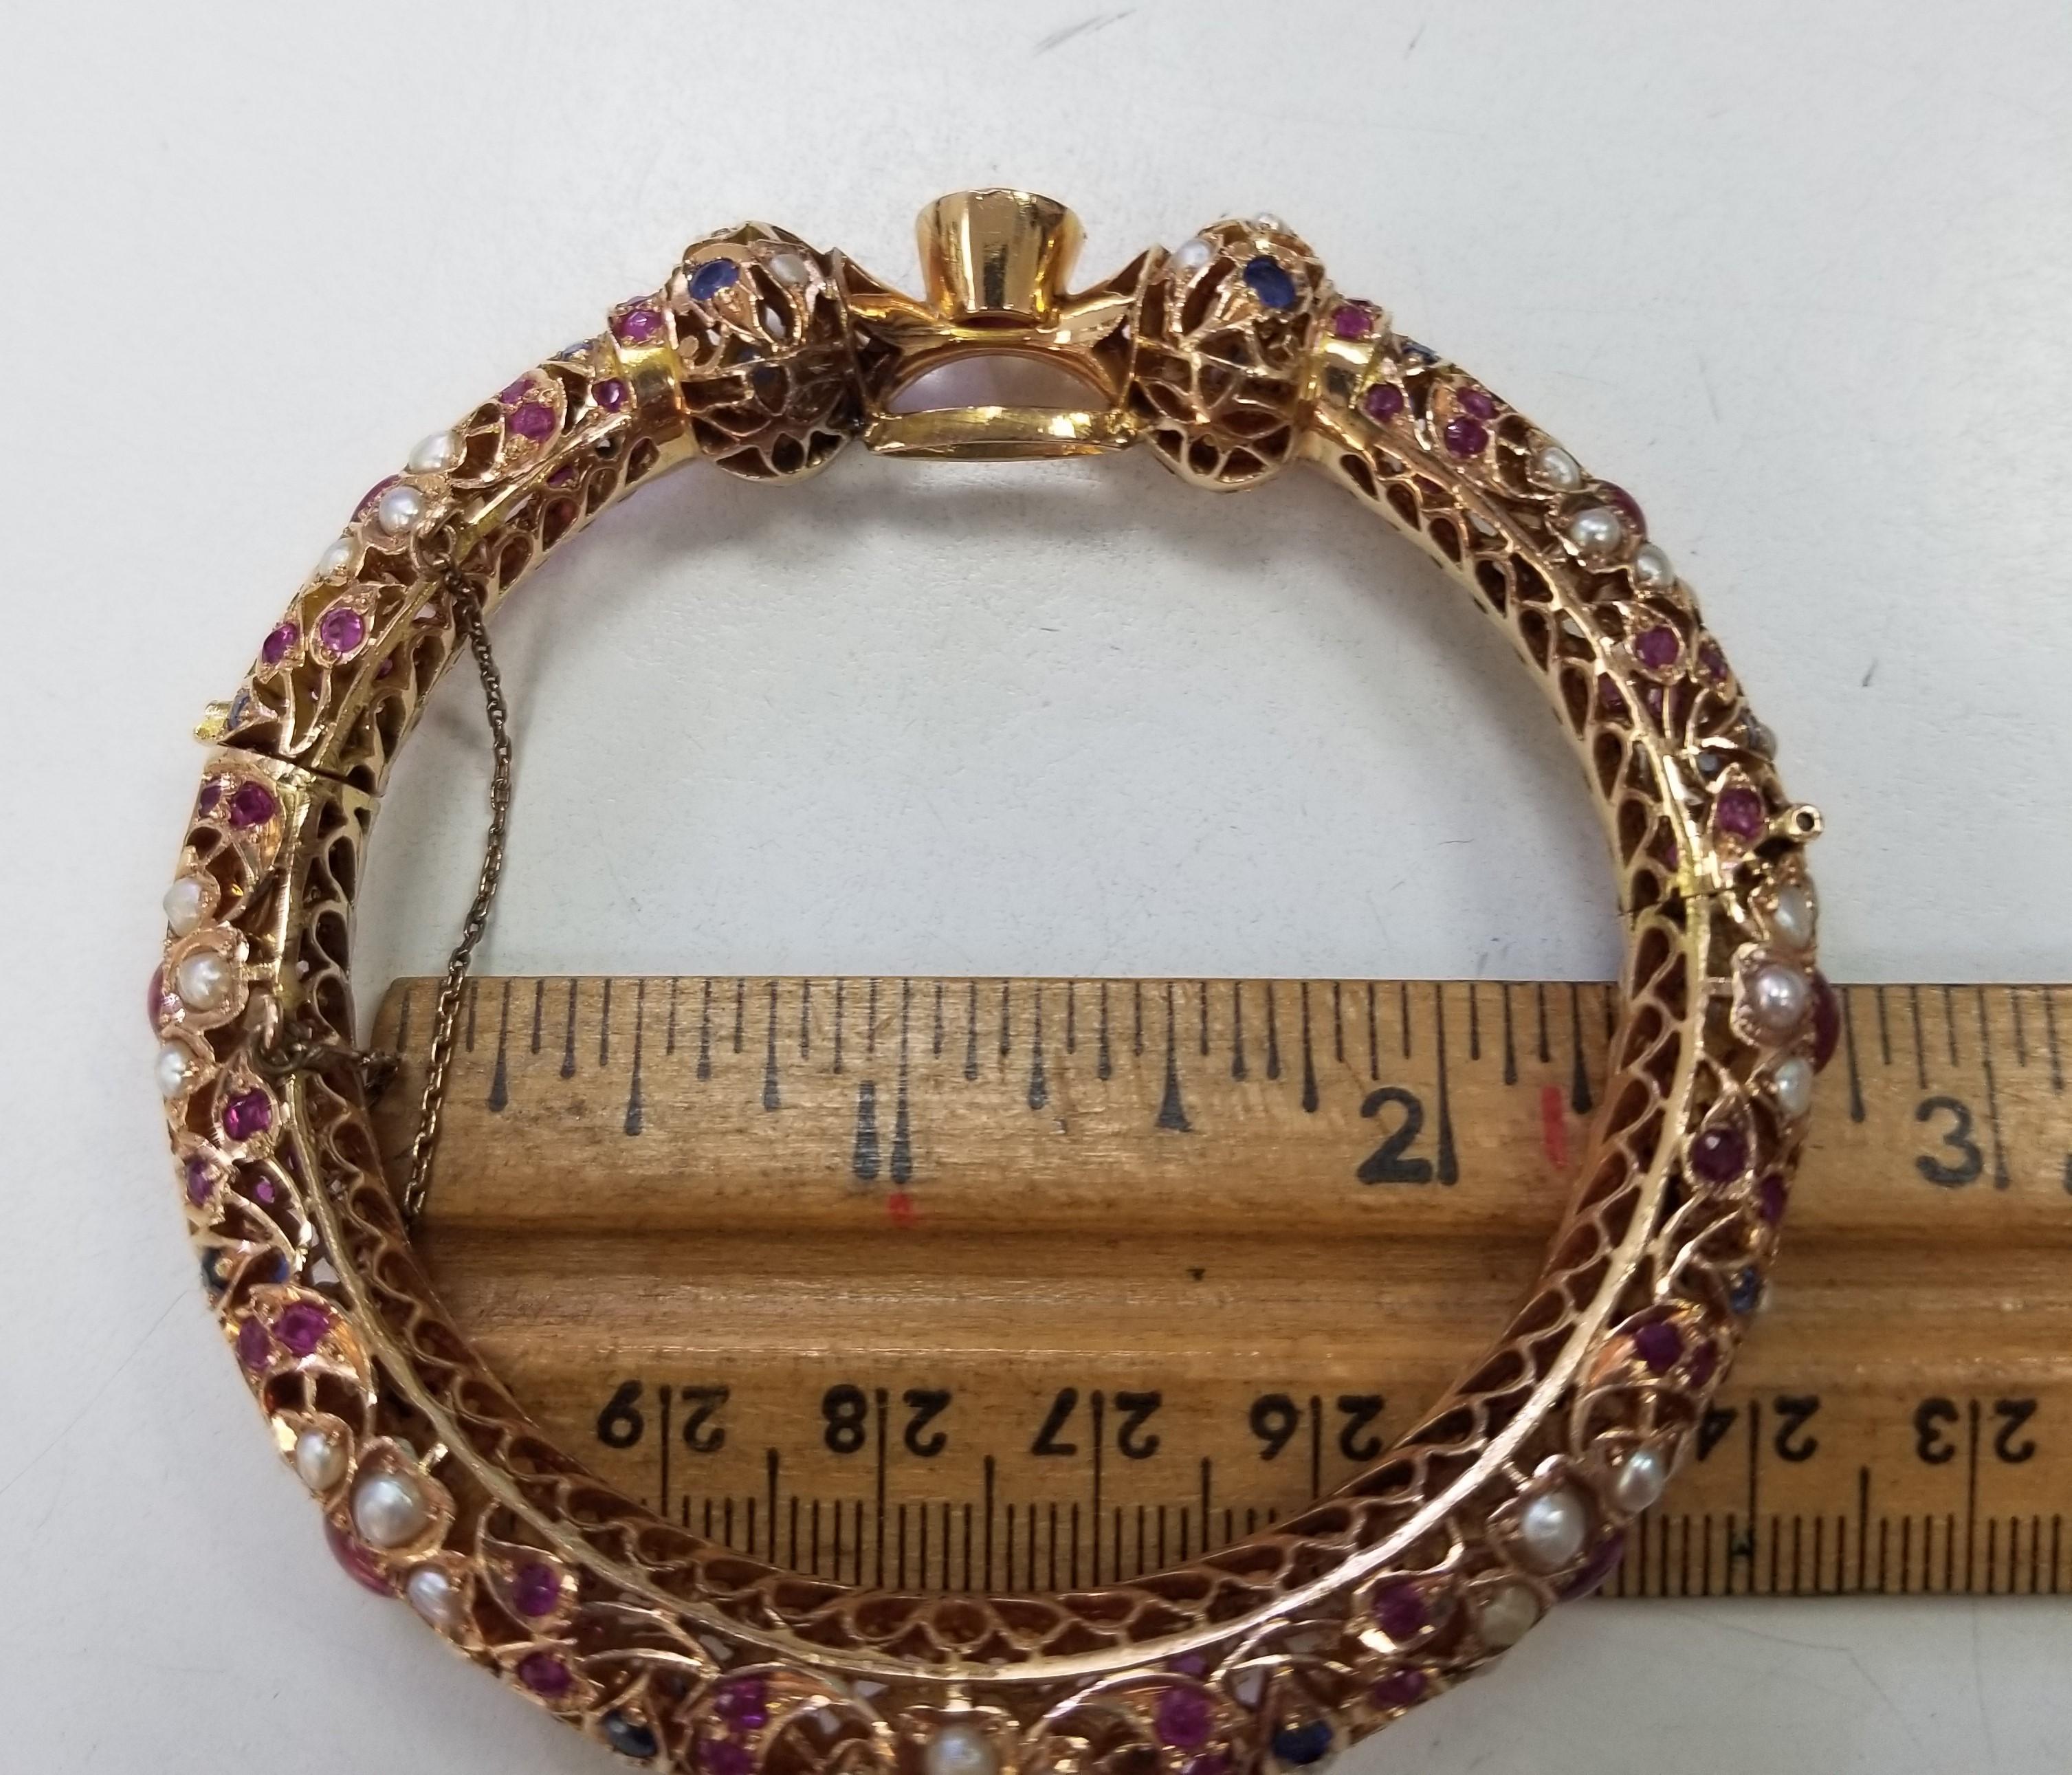 Artiste Vintage 14 Karat Yellow Gold Ruby, Sapphire and Pearl Bangle form the 